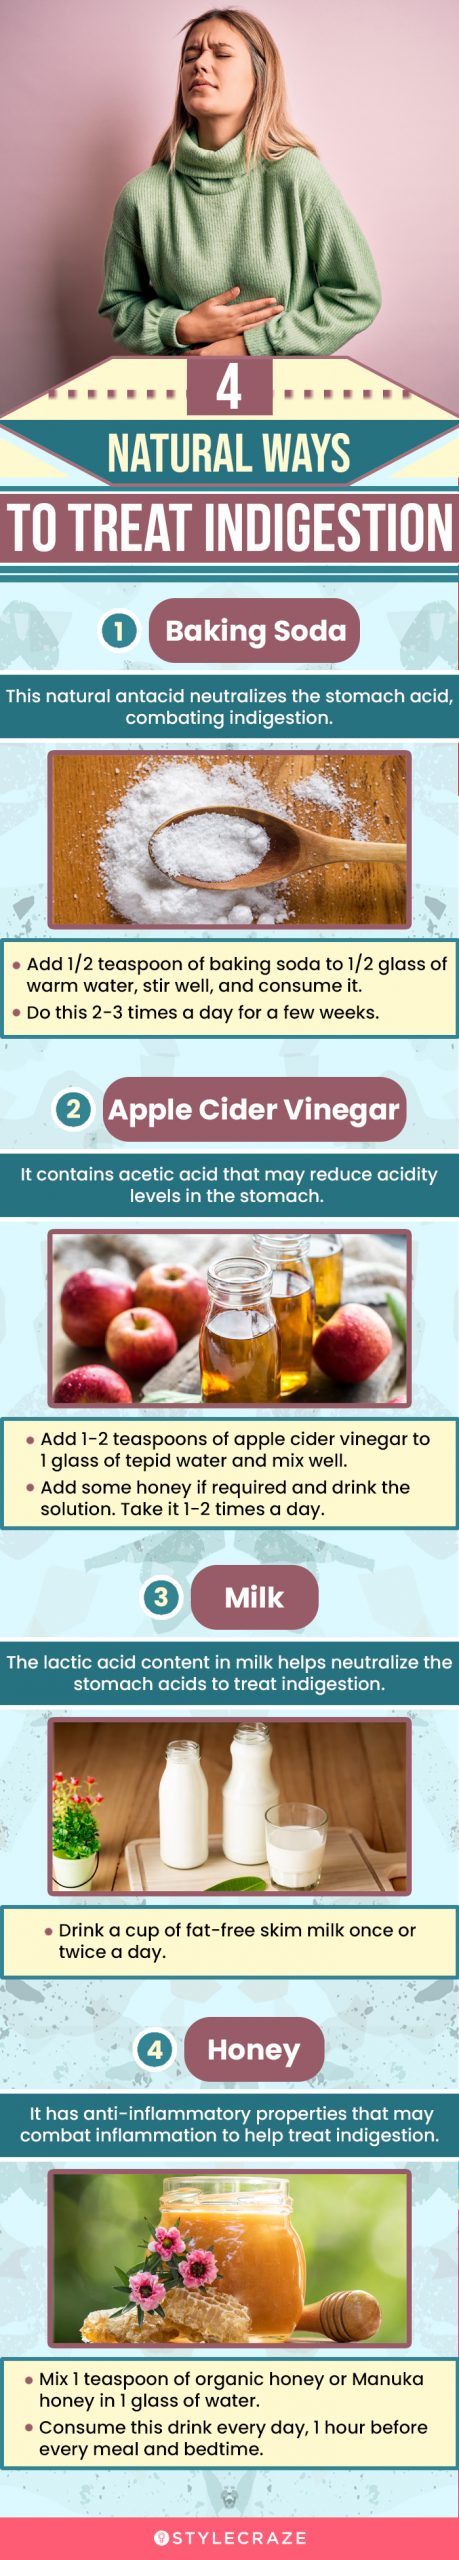 4 natural ways to treat indigestion (infographic)